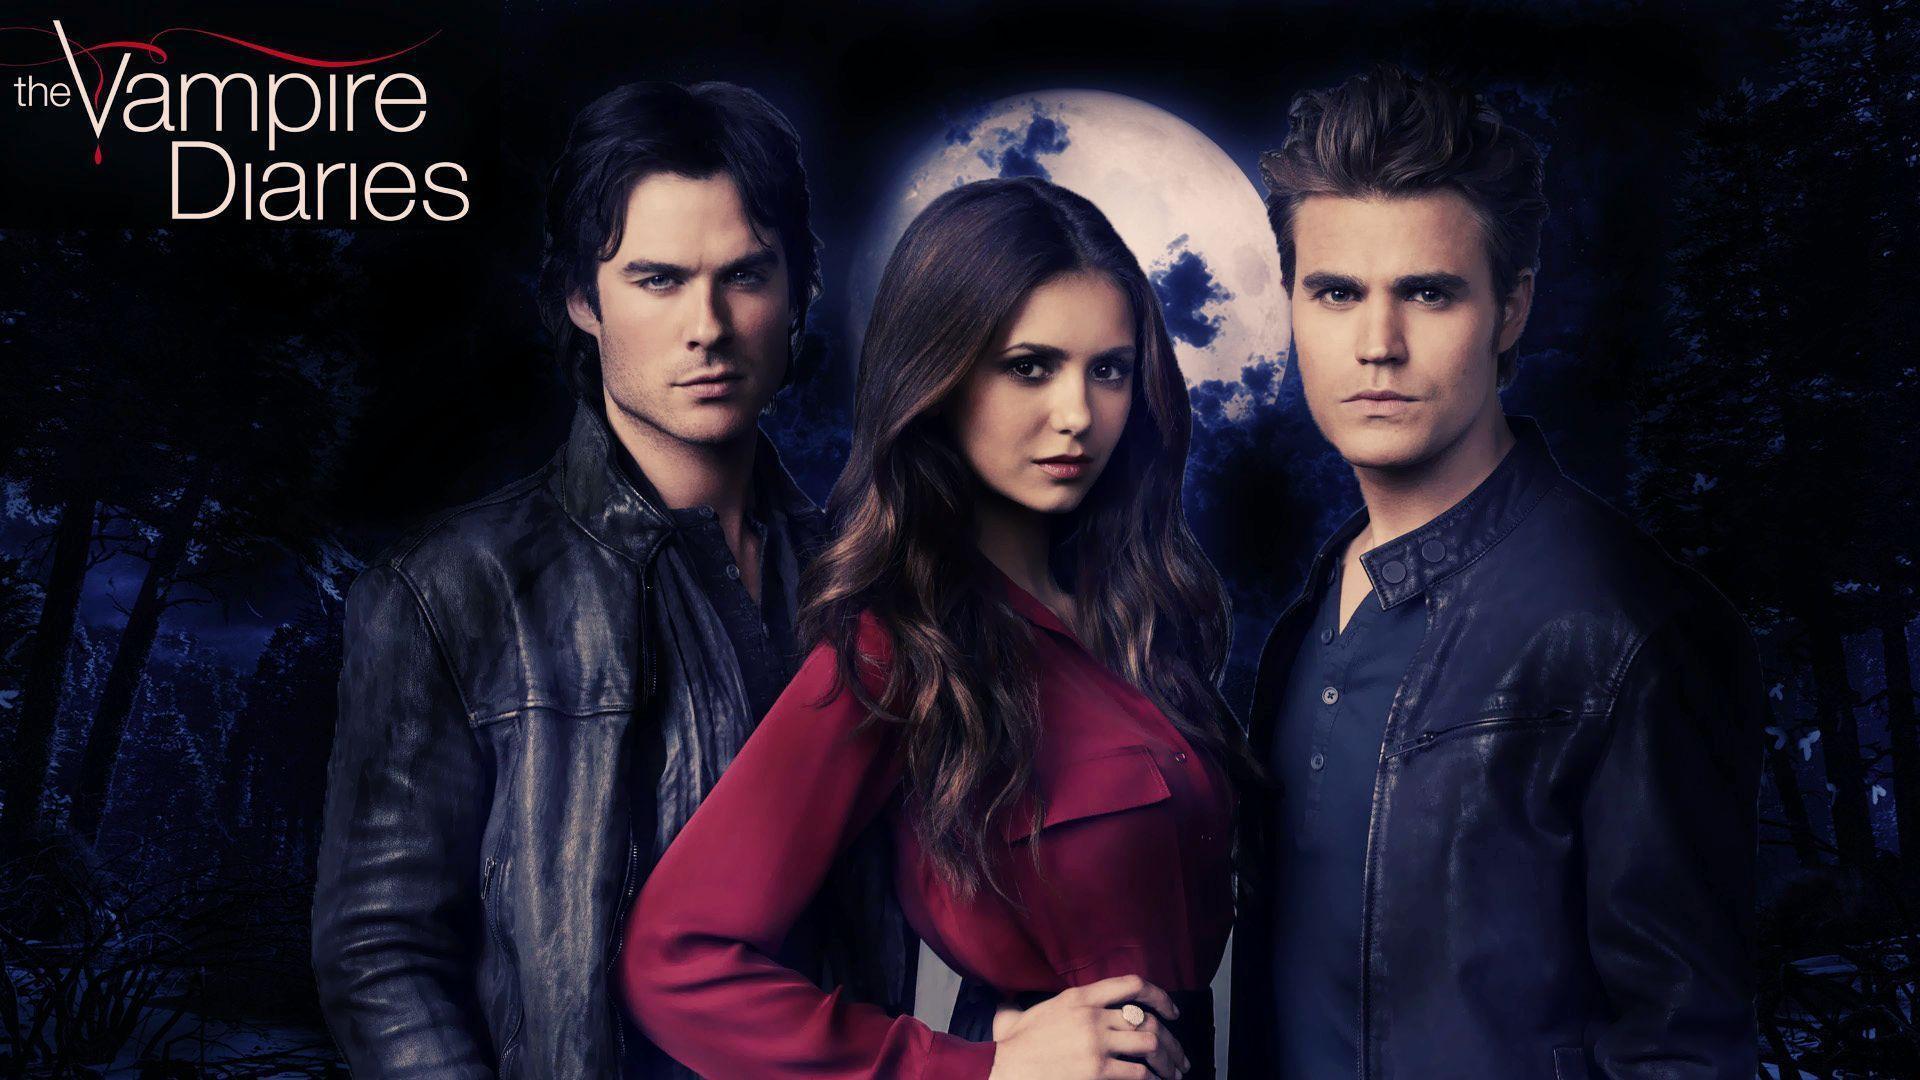 Vampire Diaries Wallpaper High Resolution and Quality Download